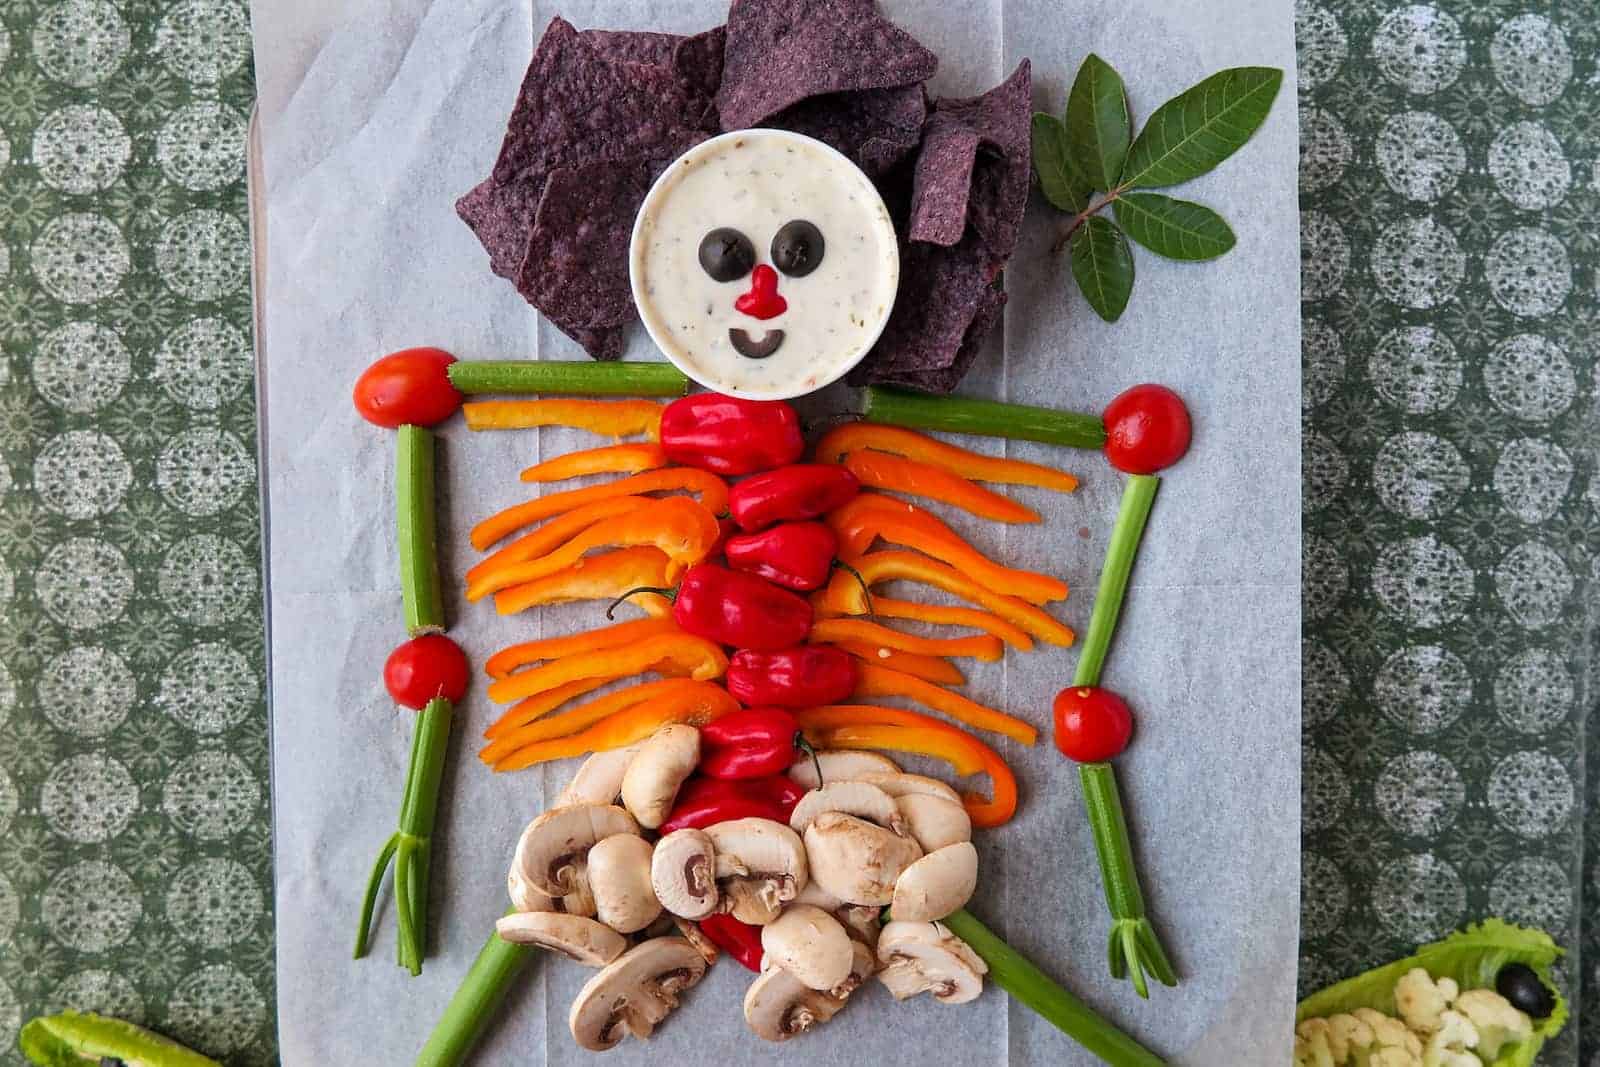 A skeleton made out of vegetables and chips.